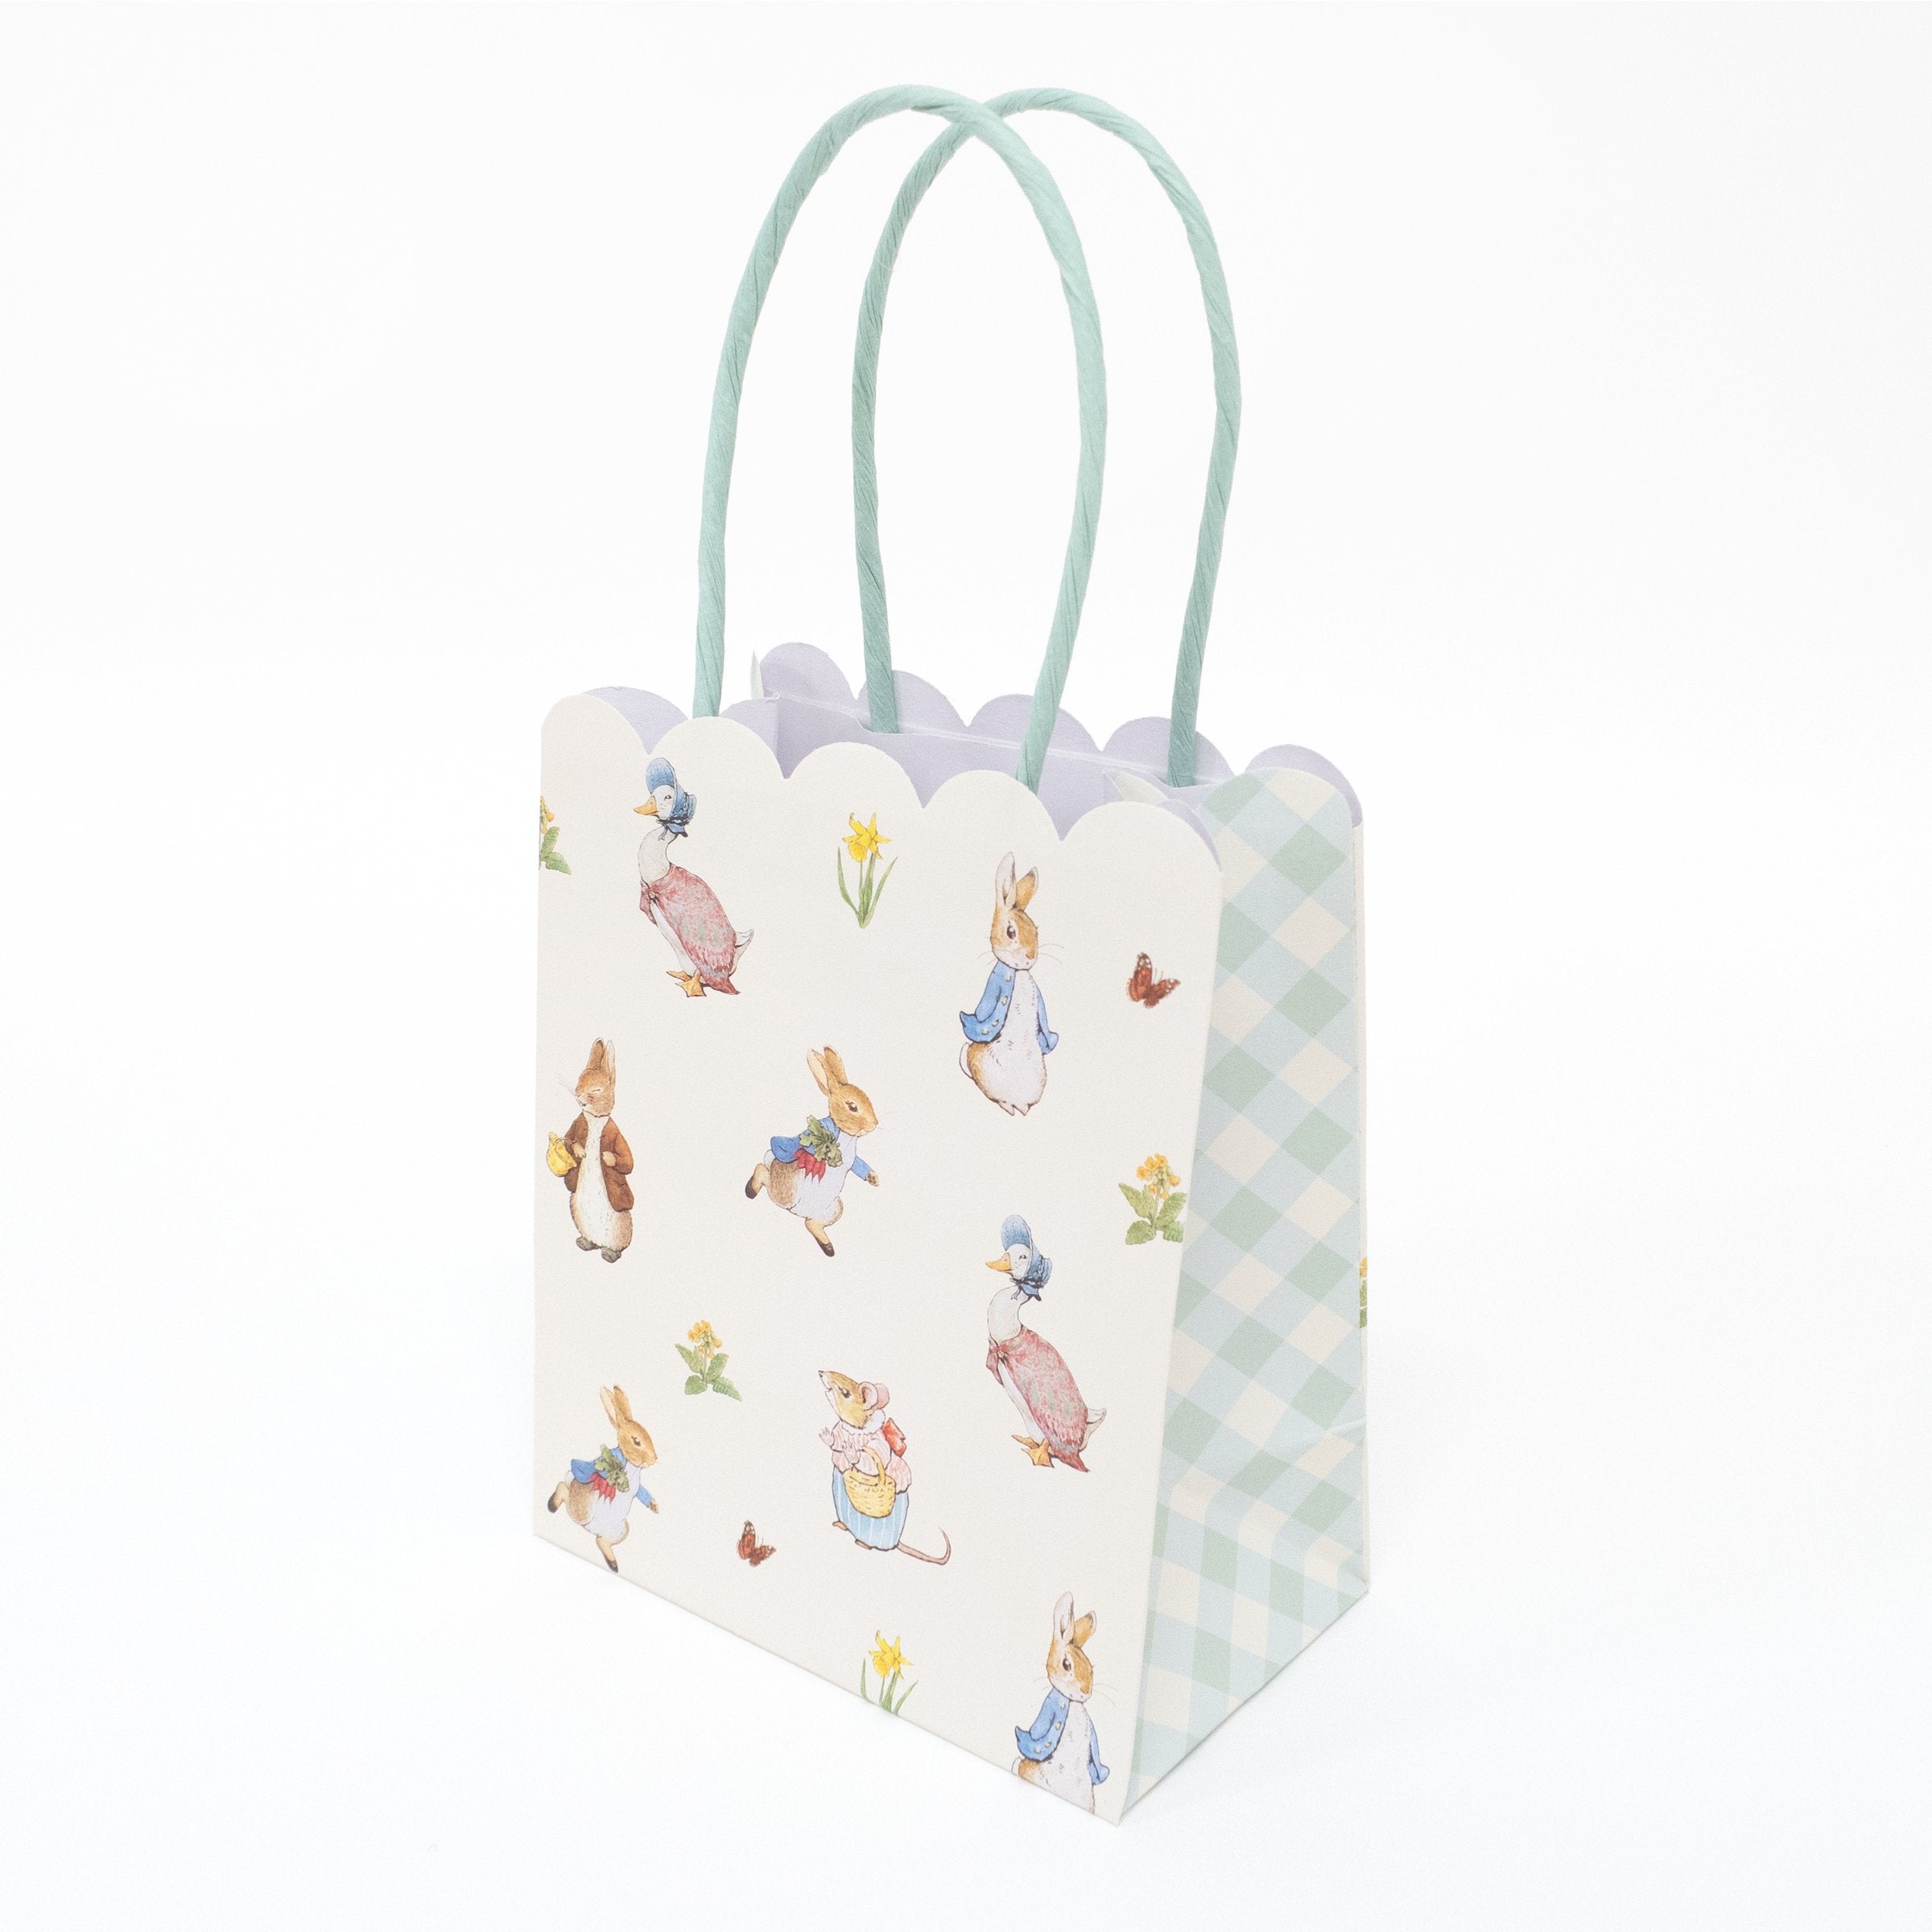 These party bags feature charming Peter Rabbit characters, scallop edges and paper handles.